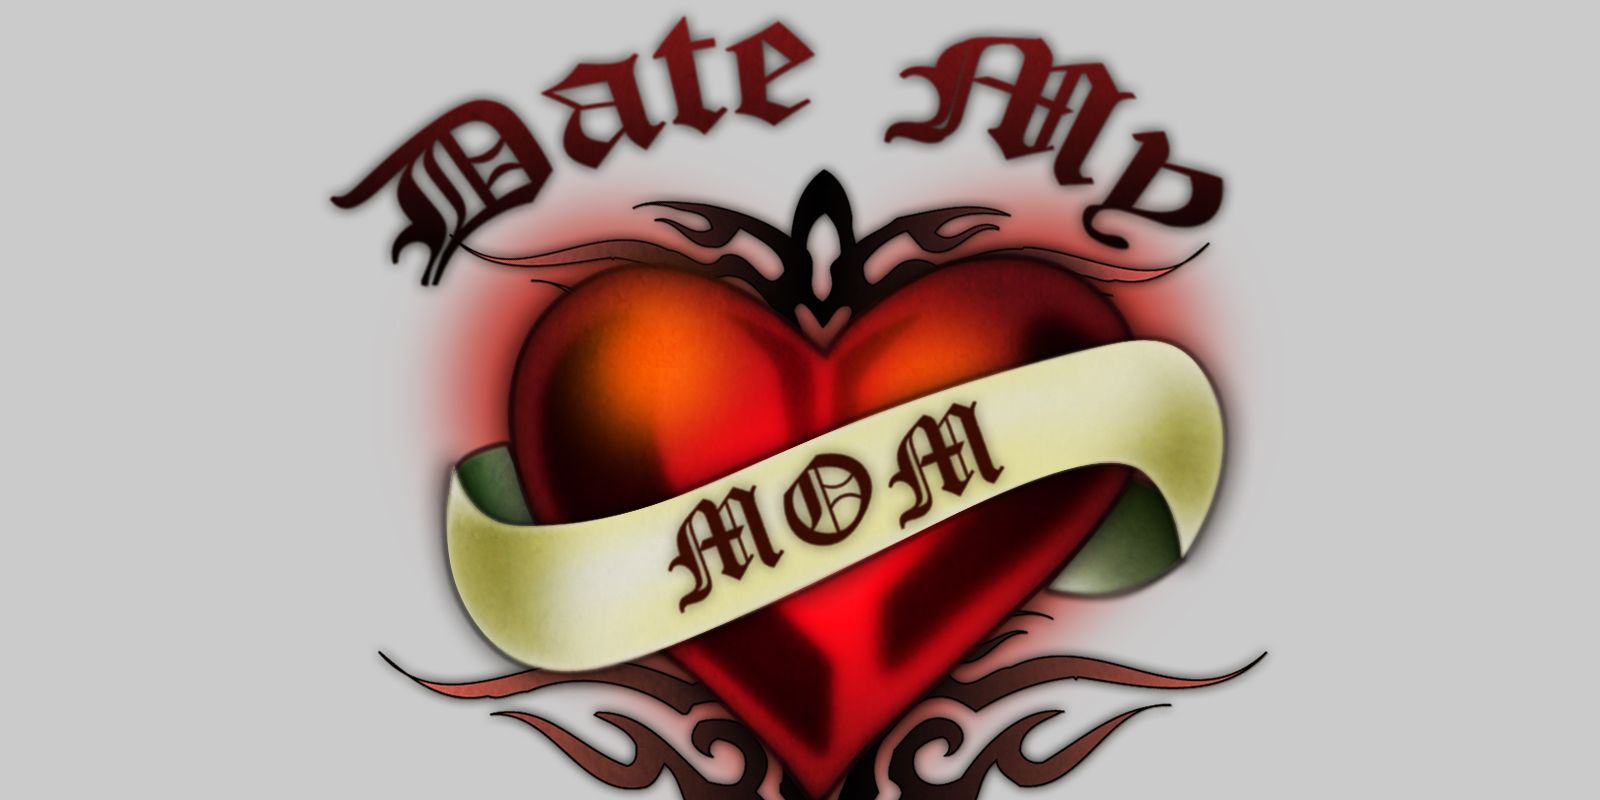 Date My Mom tv show title with heart logo in tattoo style